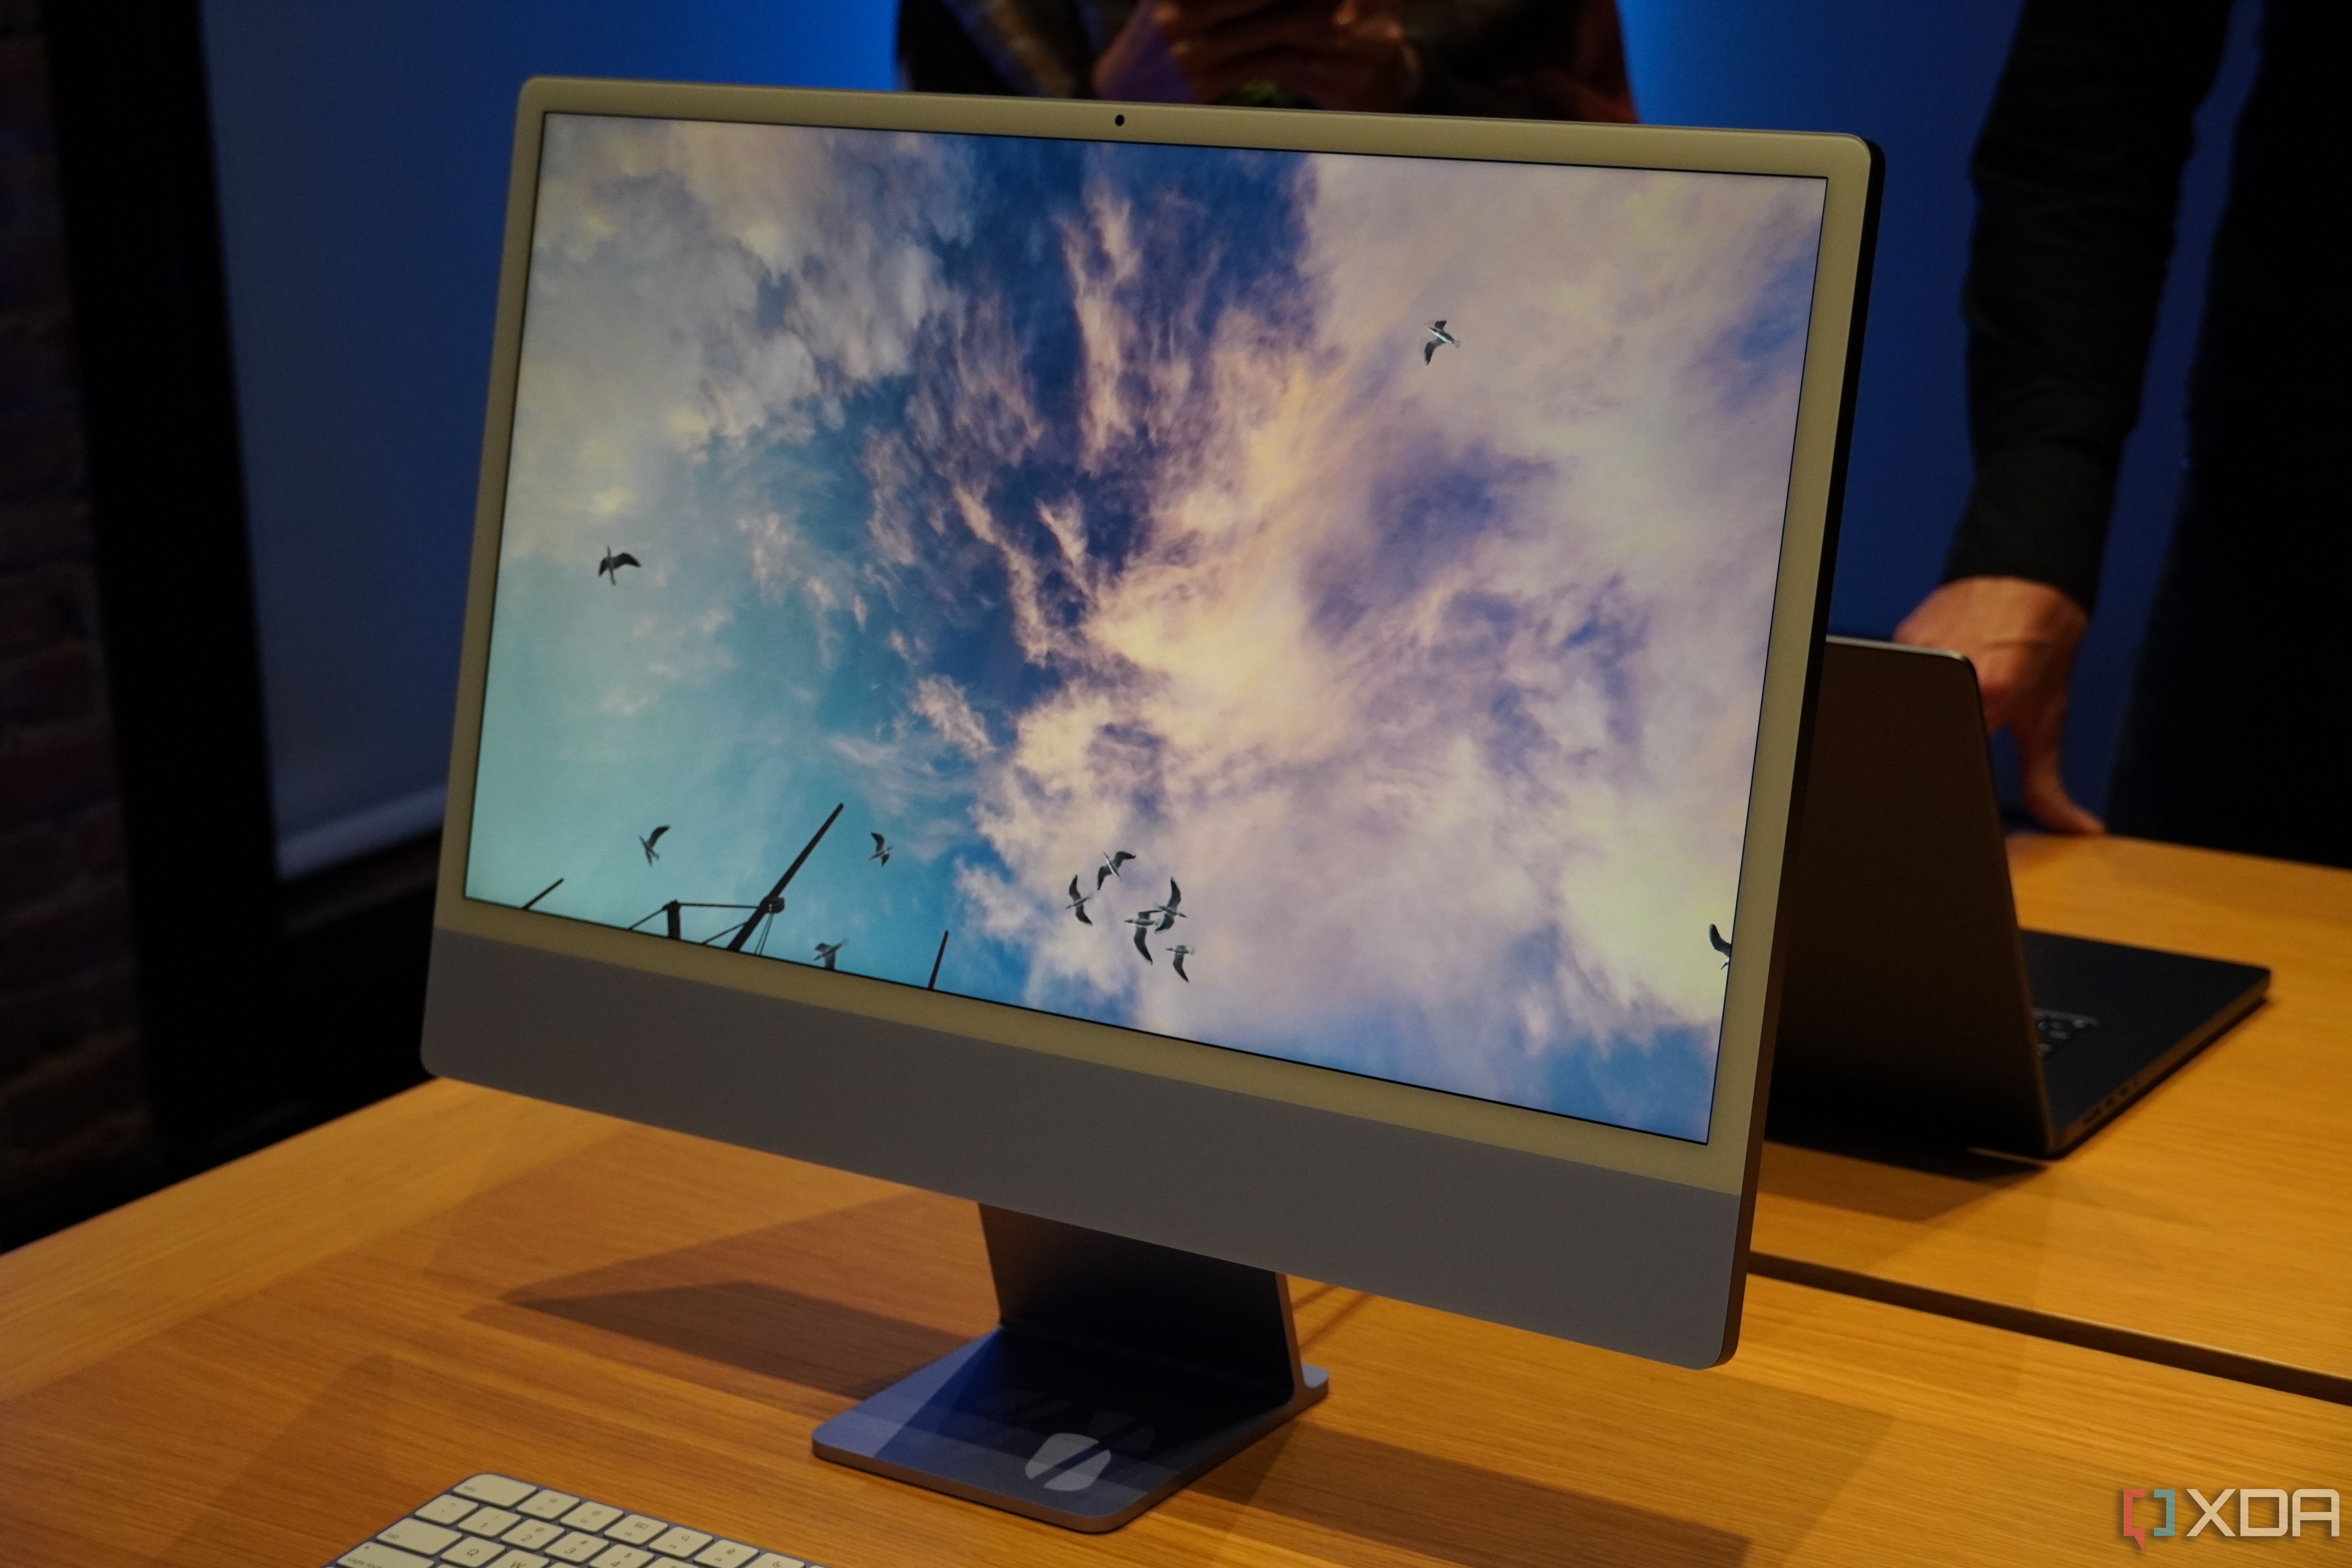 The 24-inch iMac is playing a game in full screen.